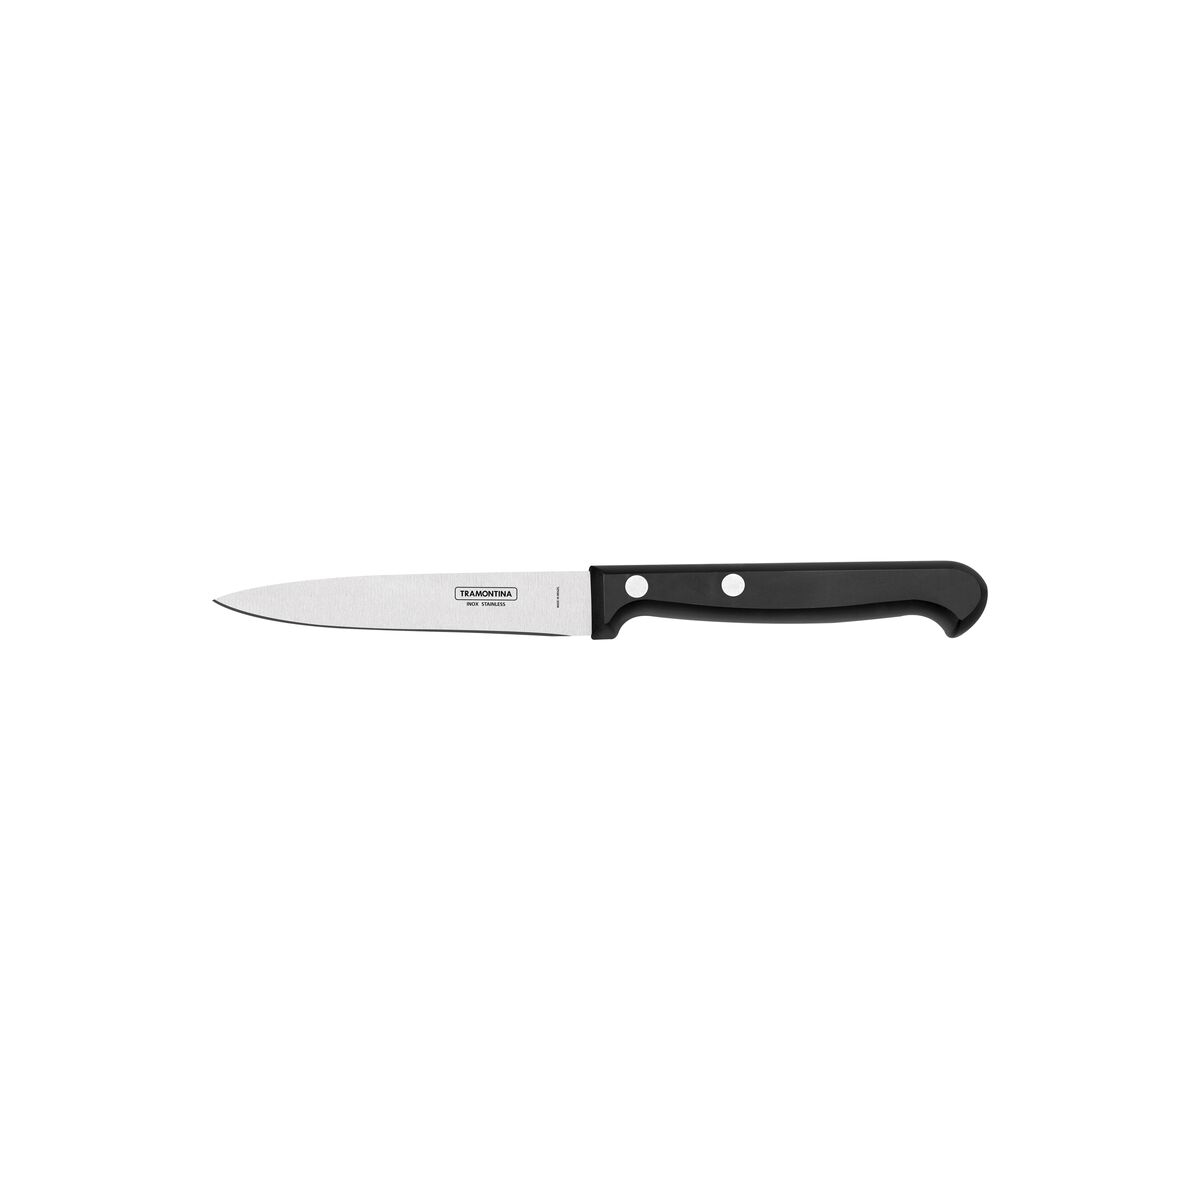 Tramontina Ultracorte 4" Vegetable and Fruit Knife with Stainless-Steel Blade and Black Polypropylene Handle